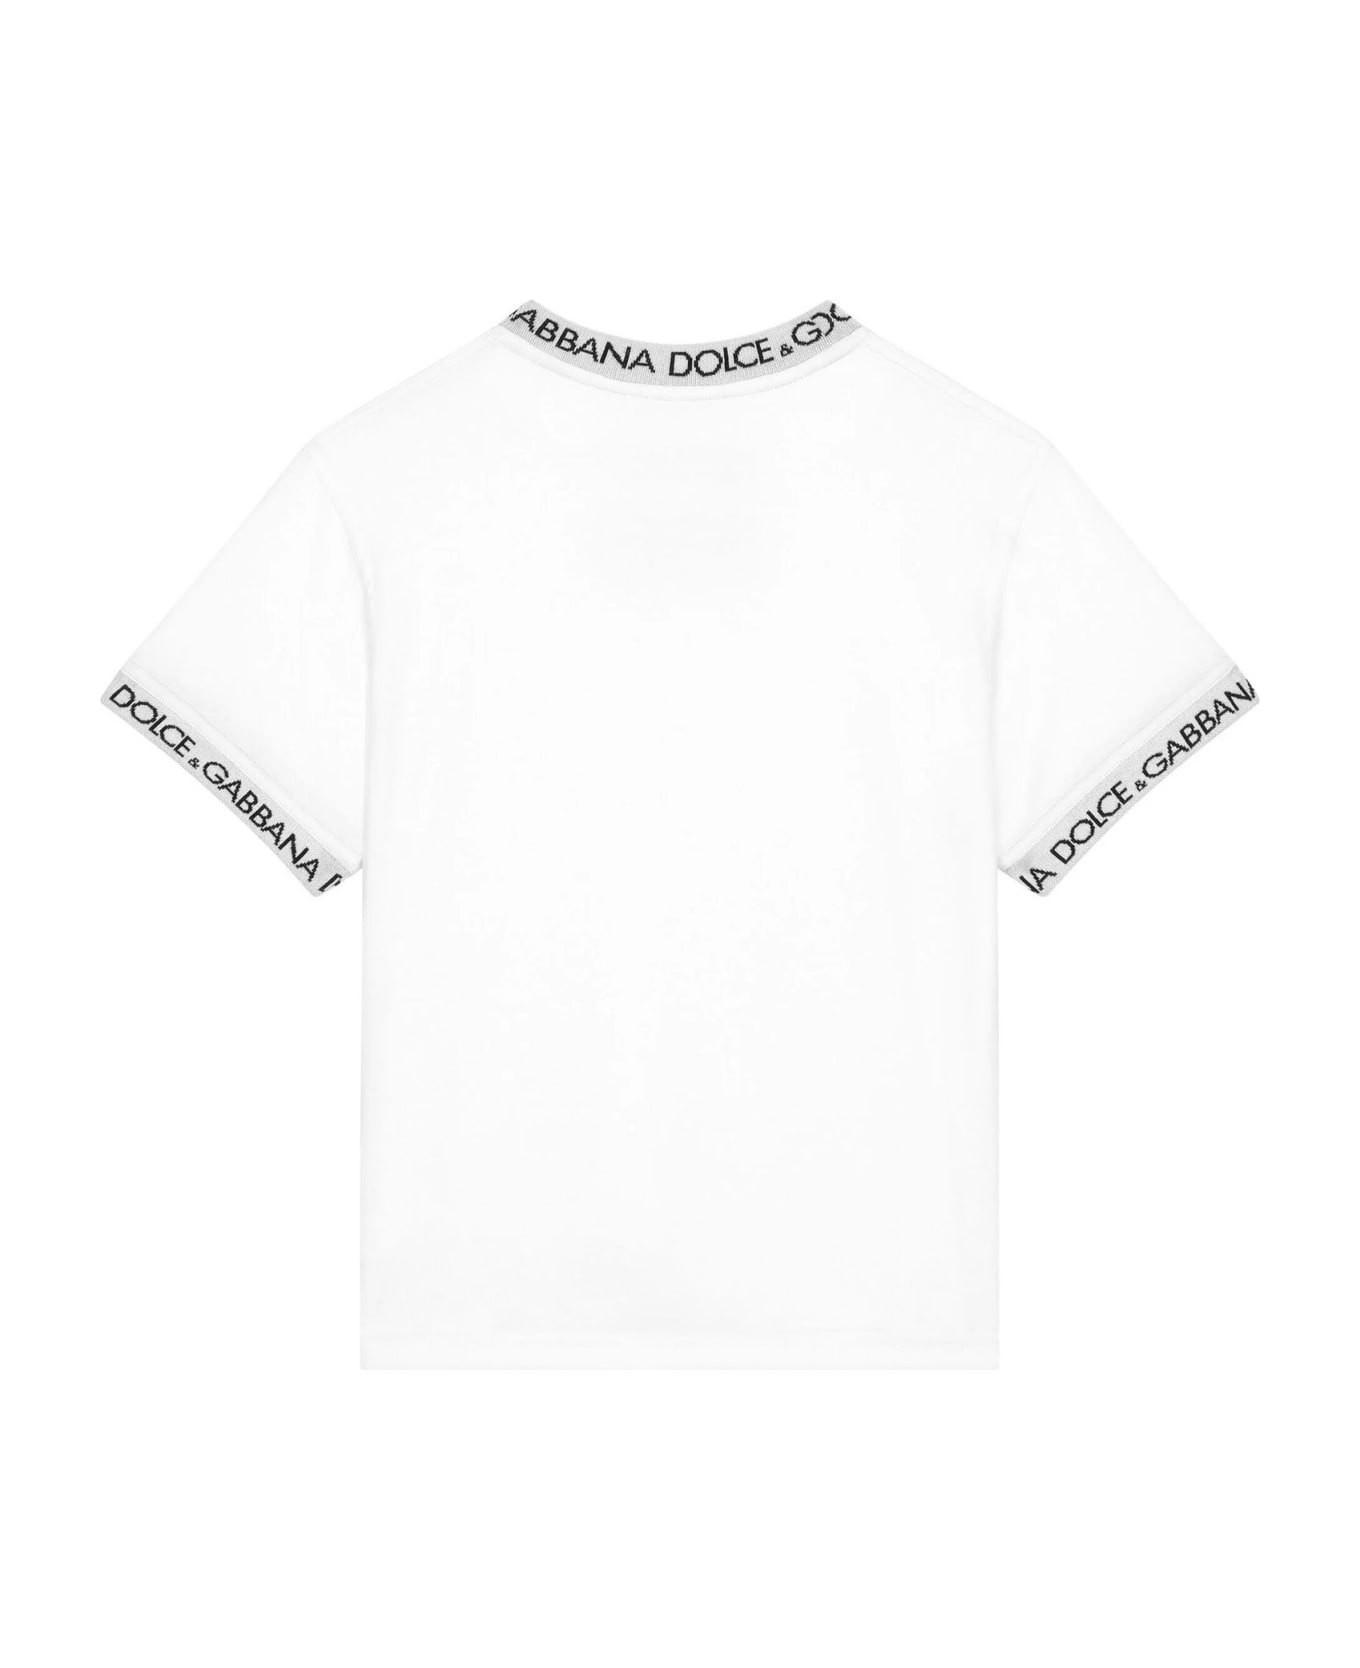 Dolce & Gabbana T-shirts And footwear-accessories Polos White - White